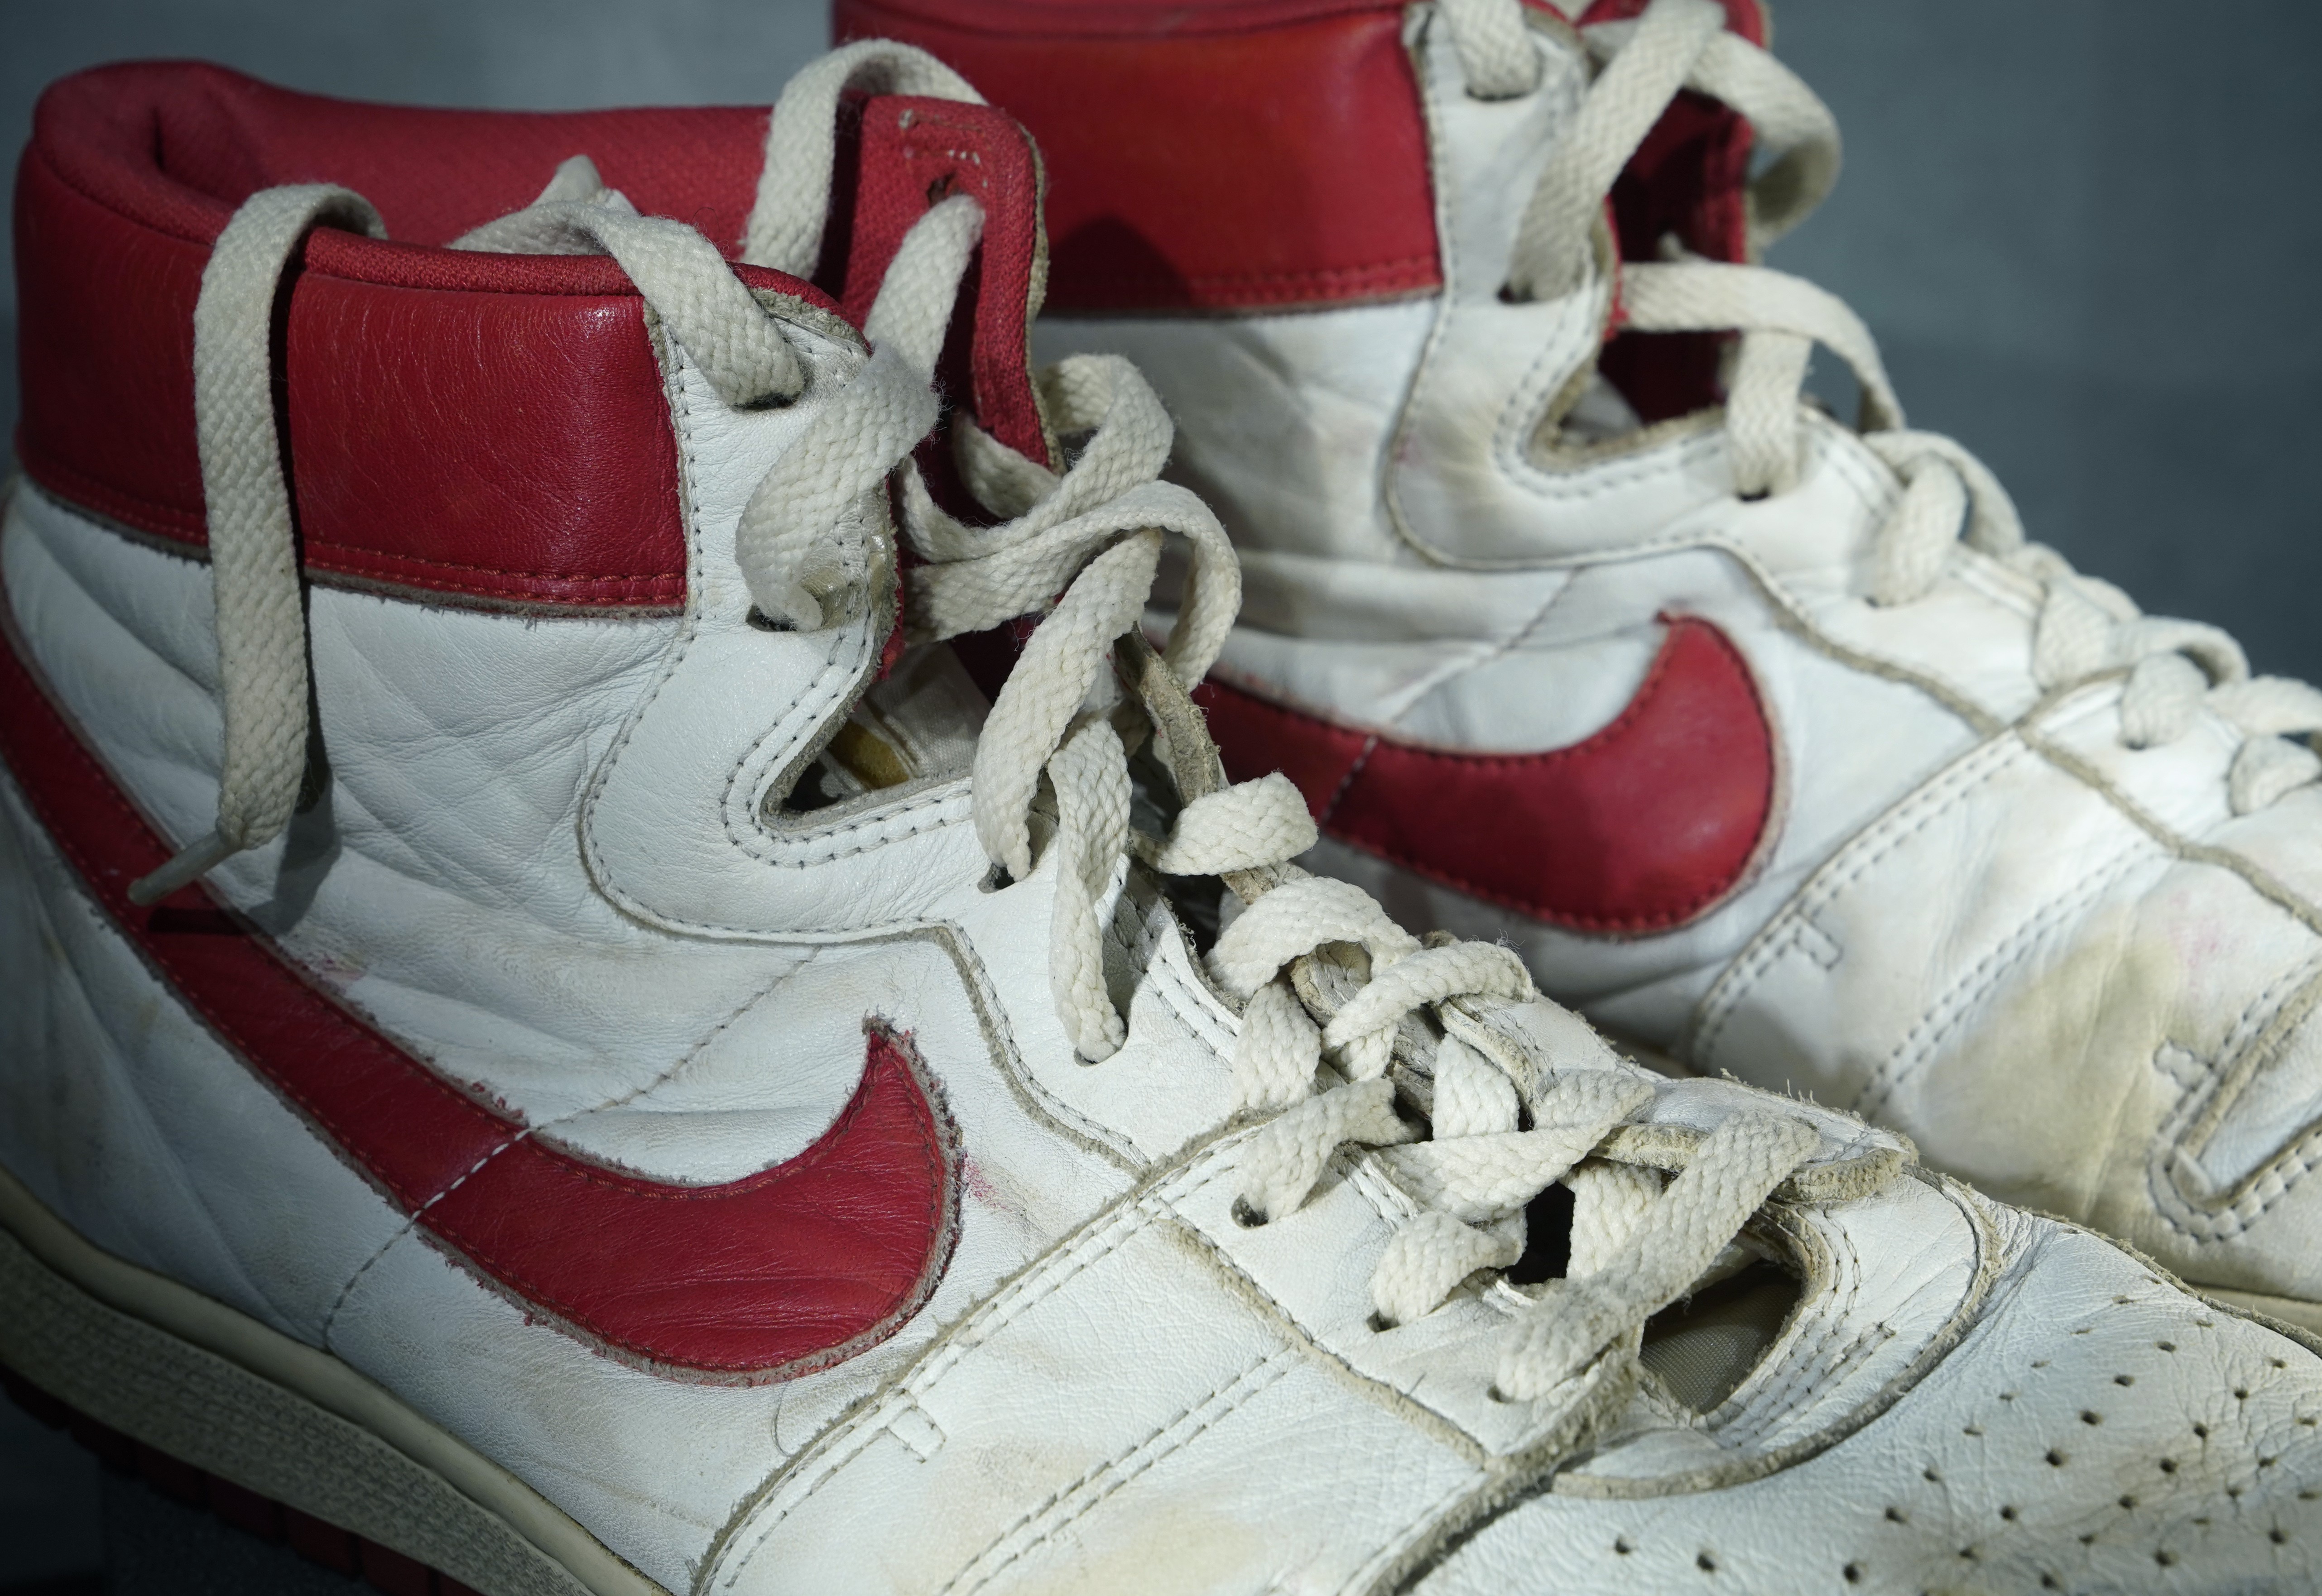 millimeter Akkumulerede Tidsserier Rare Nike shoes worn by Michael Jordan during rookie season sell at auction  for record $1.47 million - oregonlive.com